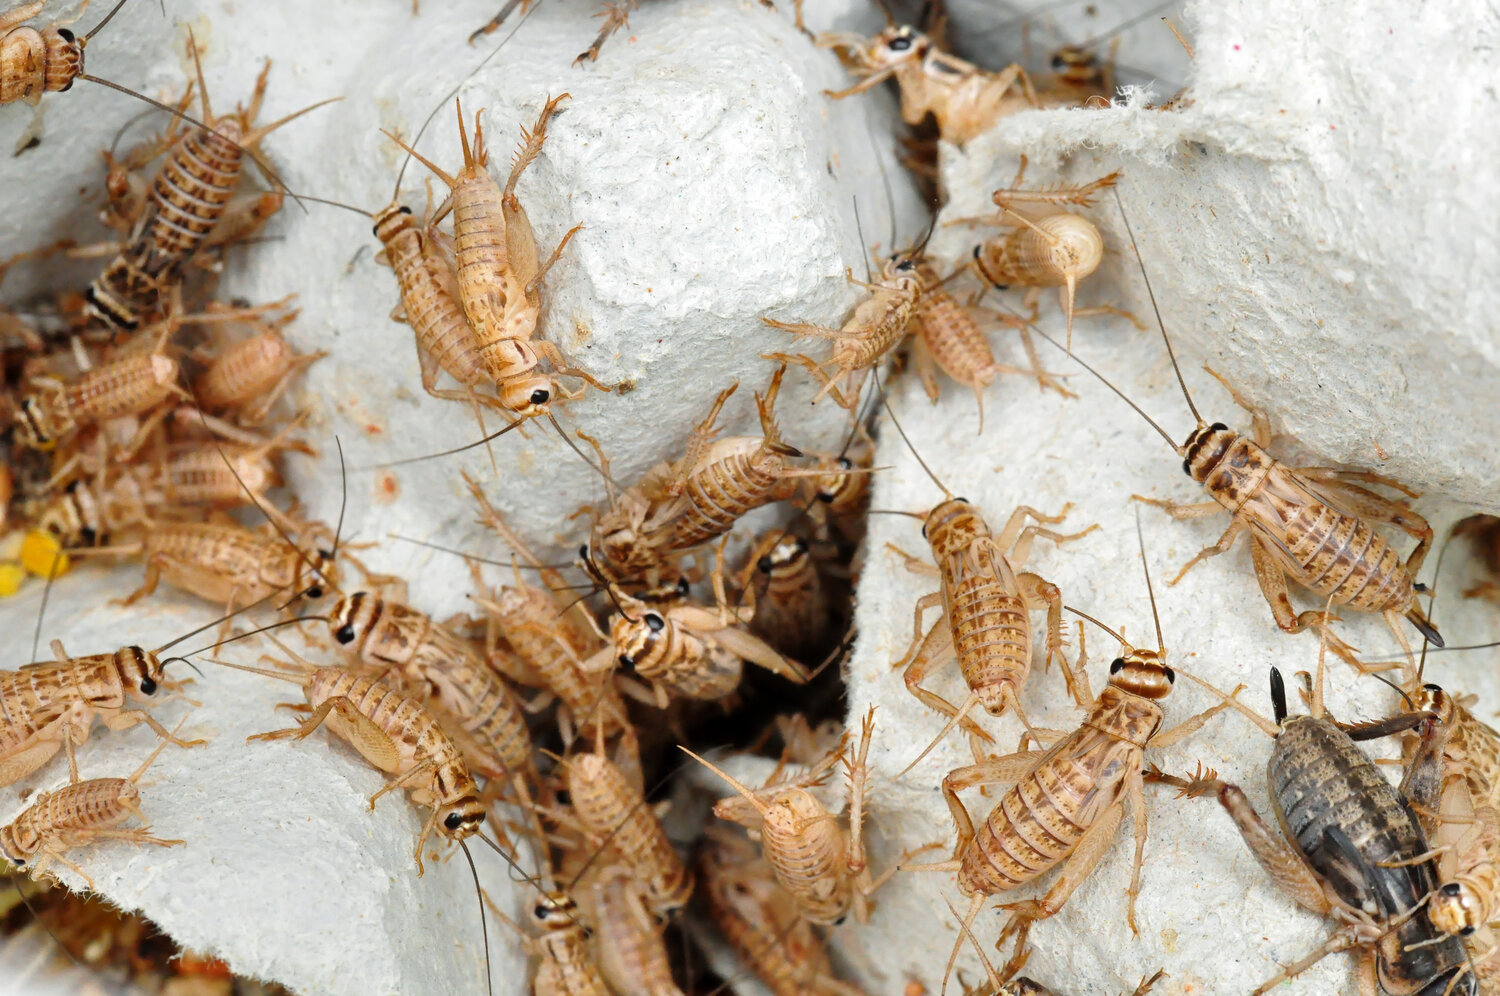 How To Get Rid of Crickets